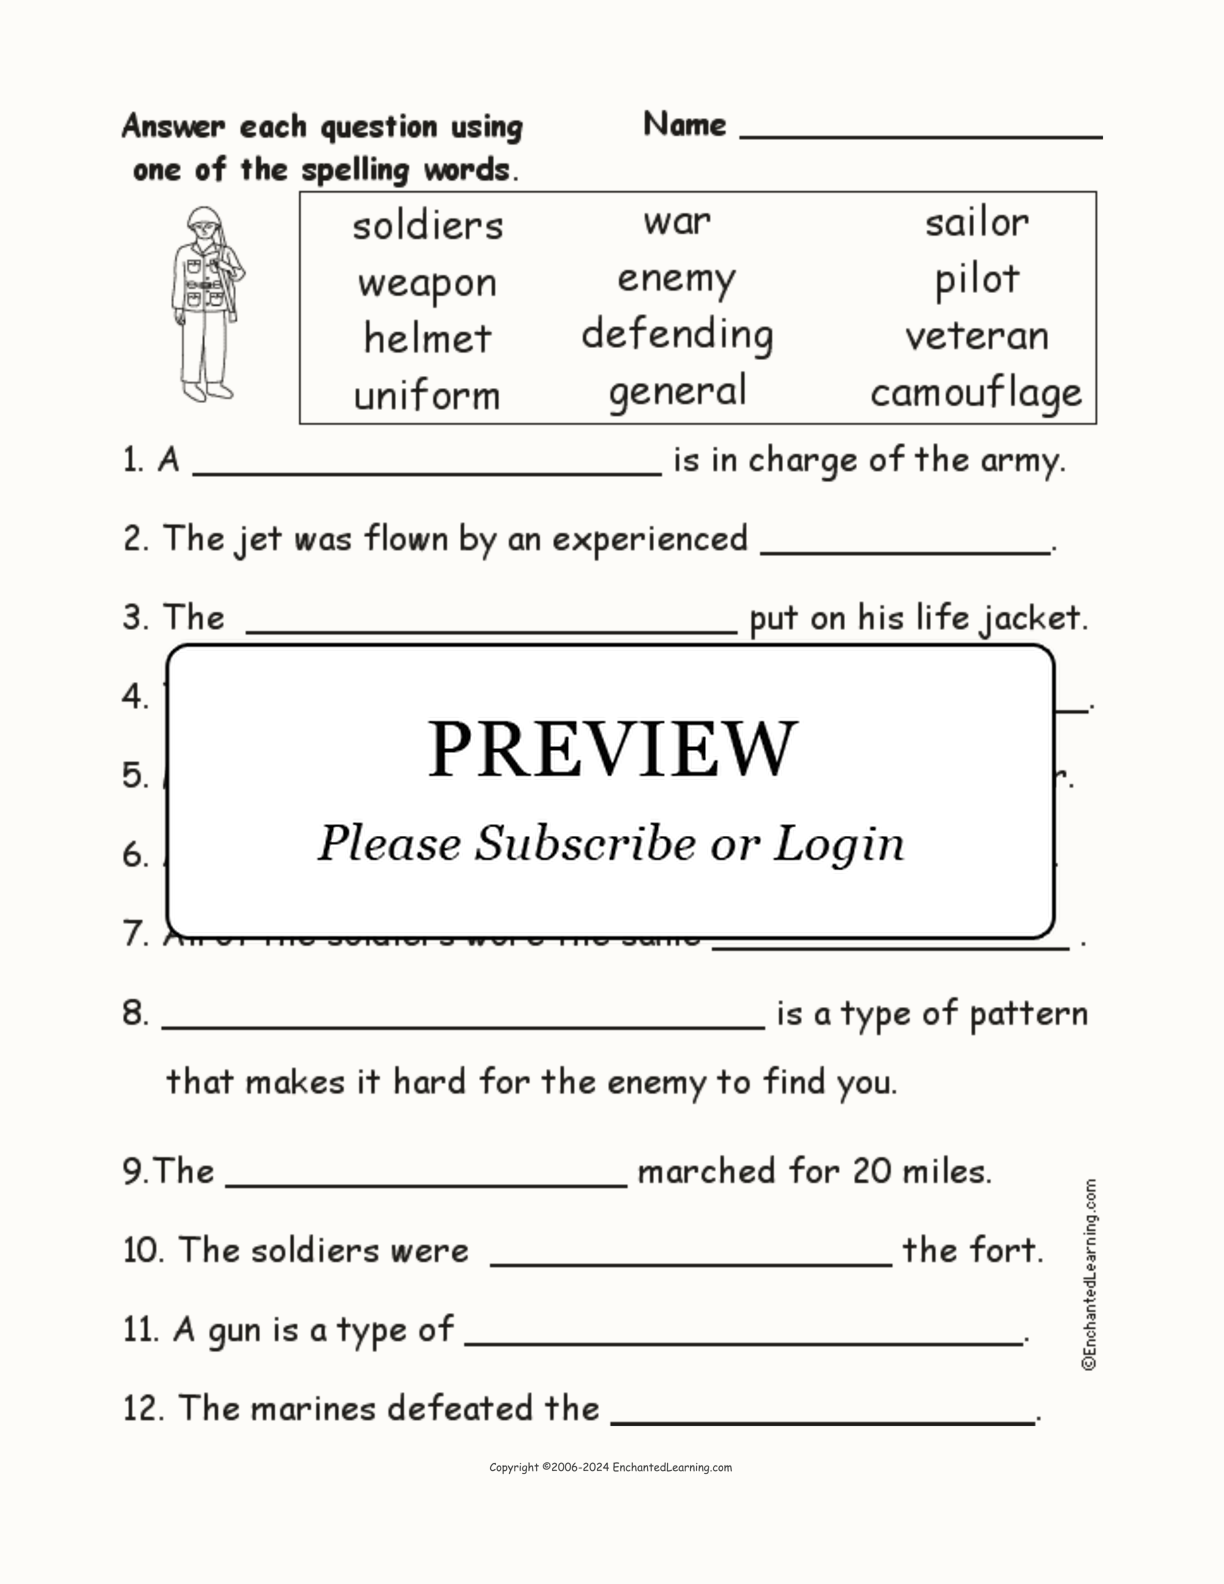 Veterans Day Spelling Word Questions interactive worksheet page 1